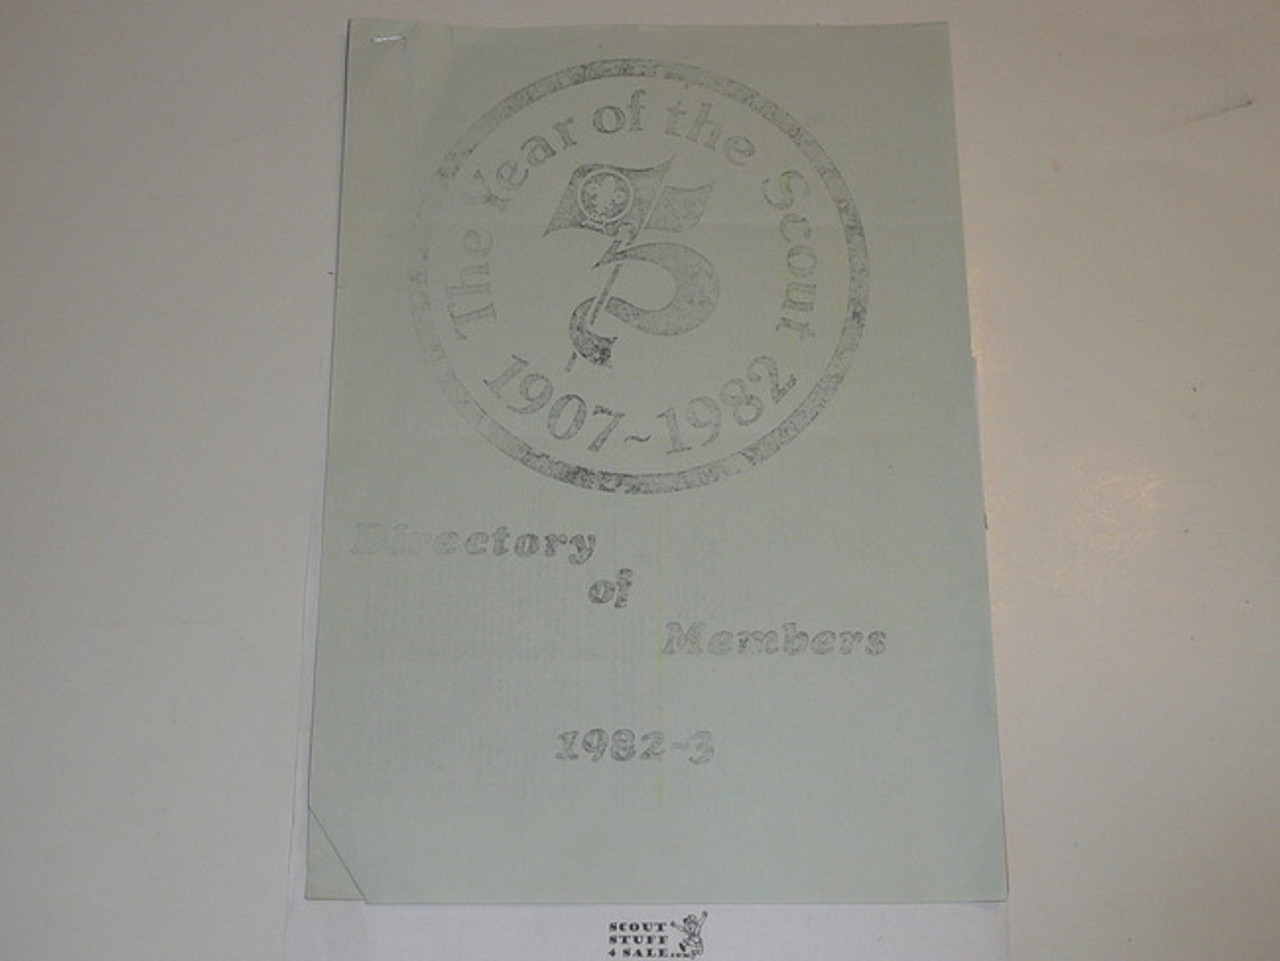 The Badgers clubb Newsletter, 1982-1983 Membership Directory